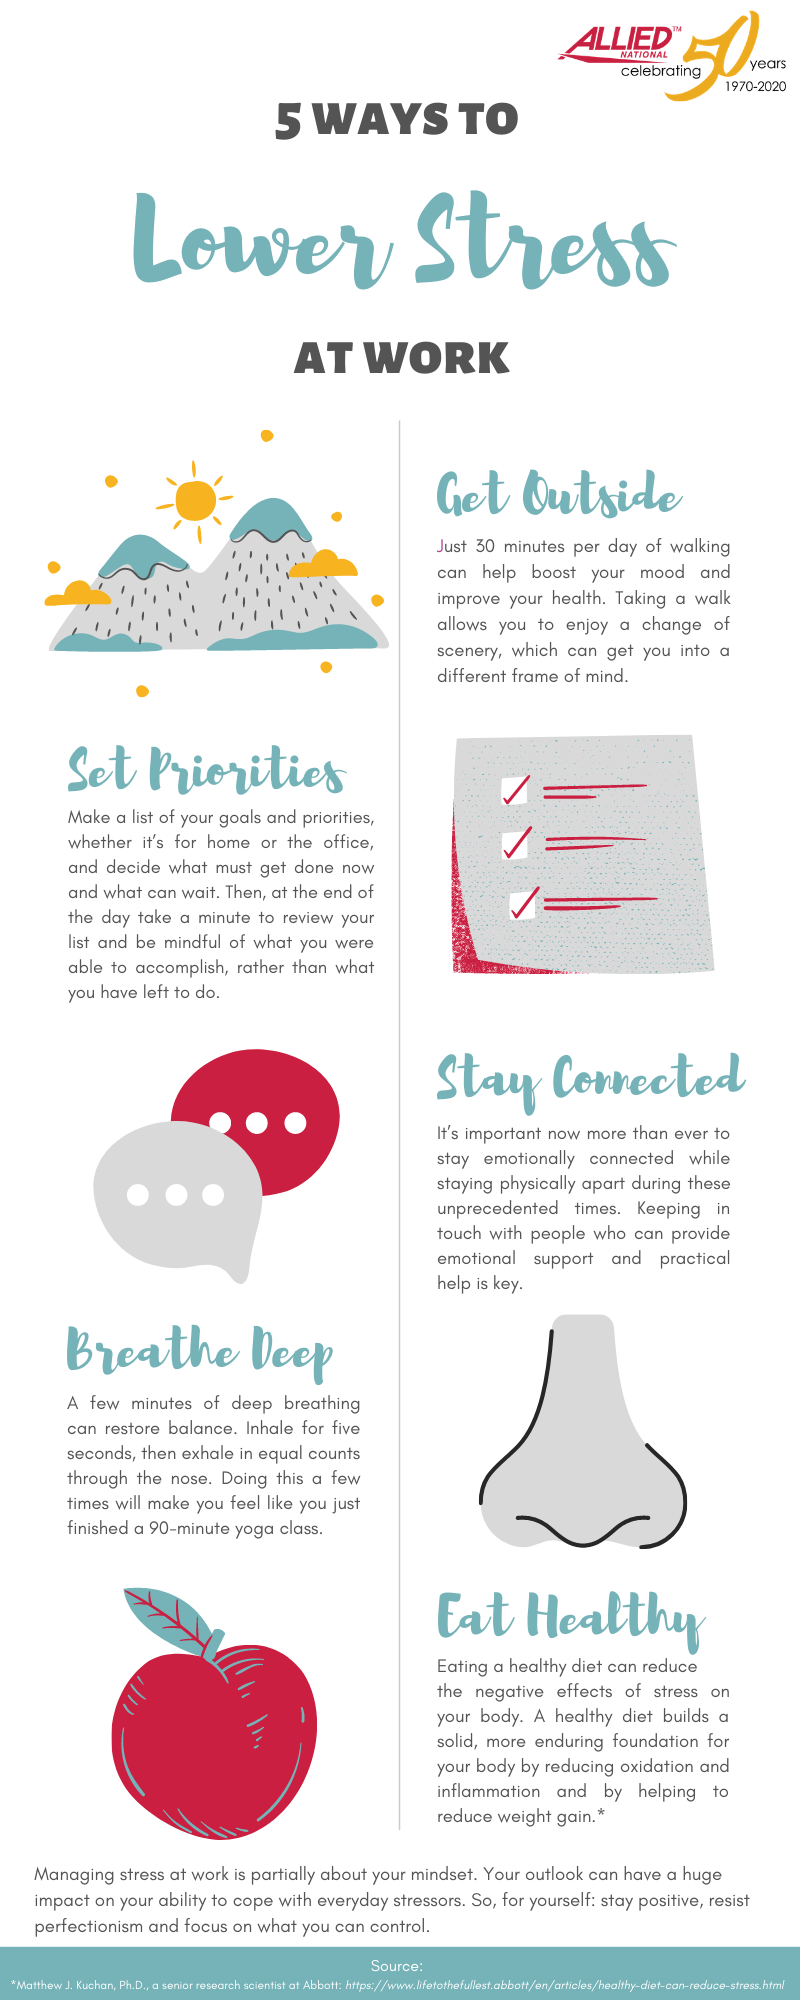 http://www.alliednational.com/uploads/4/9/2/1/49212671/infographic-5-ways-to-lower-stress-at-work_orig.png